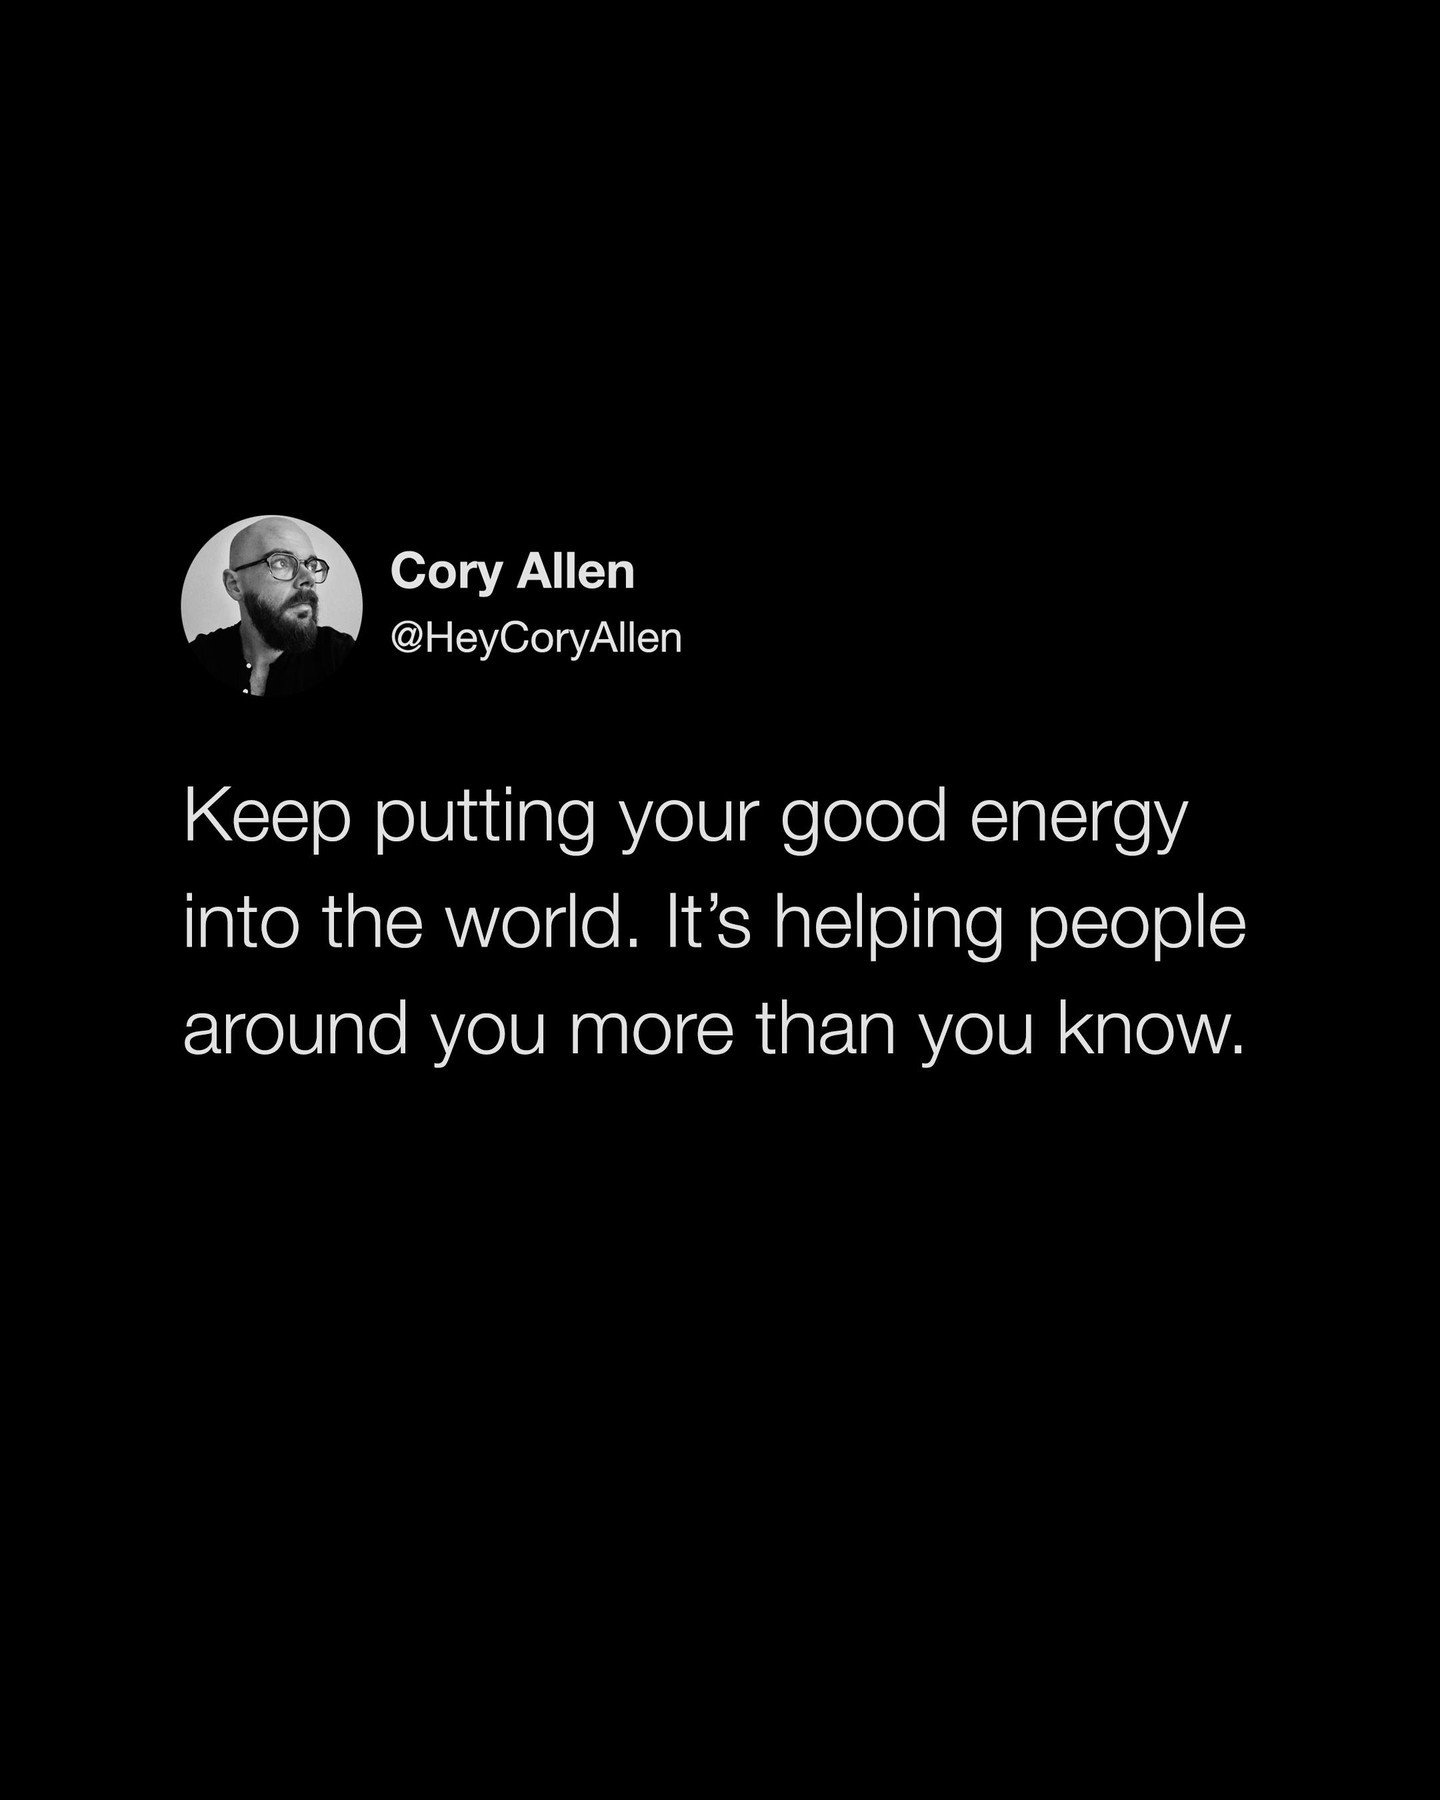 Drop a 🖤 if you feel this.

@heycoryallen: Keep putting your good energy into the world. It&rsquo;s helping people around you more than you know.